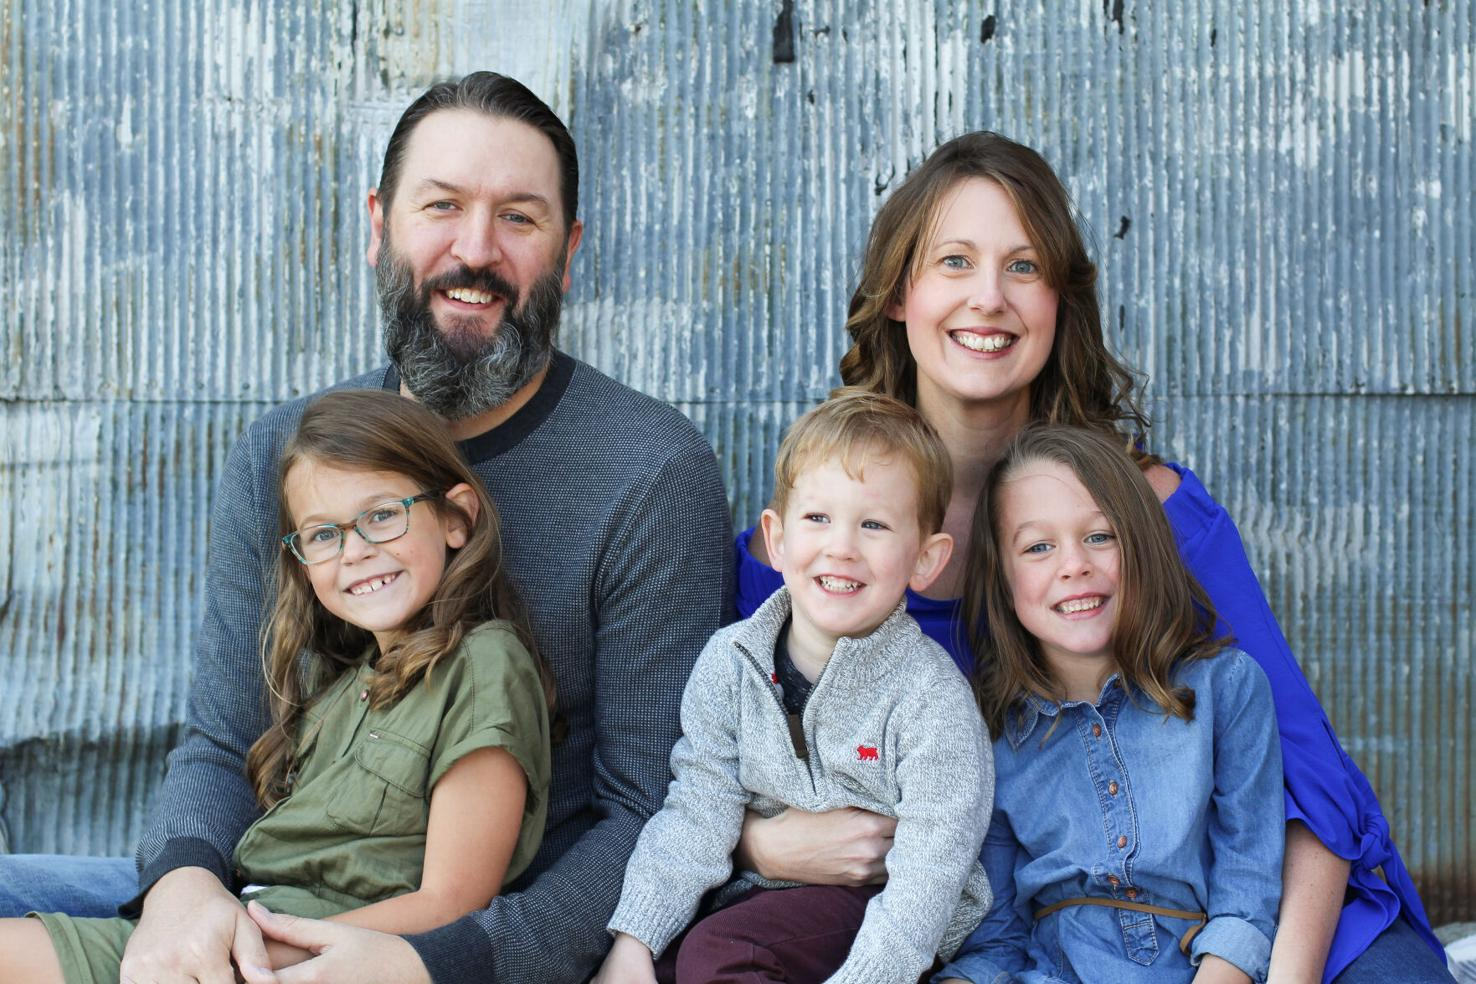 Eric Sauser and Crystal Sauser with their 3 children in a family photo